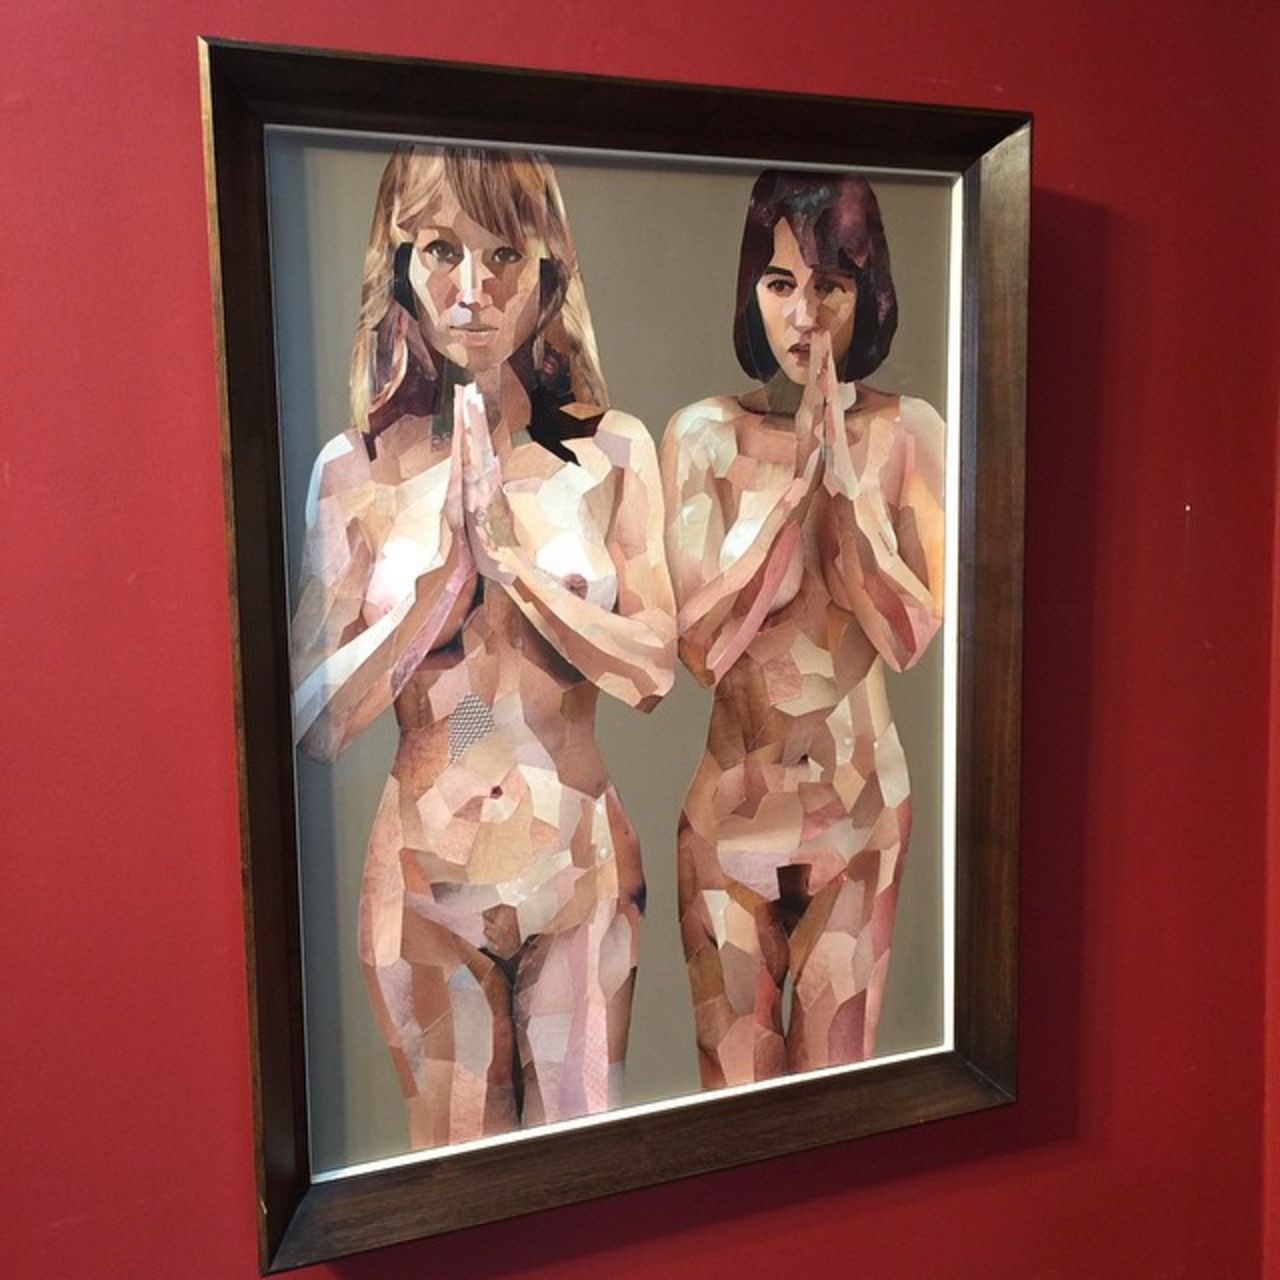 "I love this Jonathan Yeo piece. It brings back many memories of me putting together his 2010 'Porn in the USA' exhibition in Beverley Hills, LA in a massive old derelict shop. I think the works of art and the show itself were one of the best shows we've ever done."